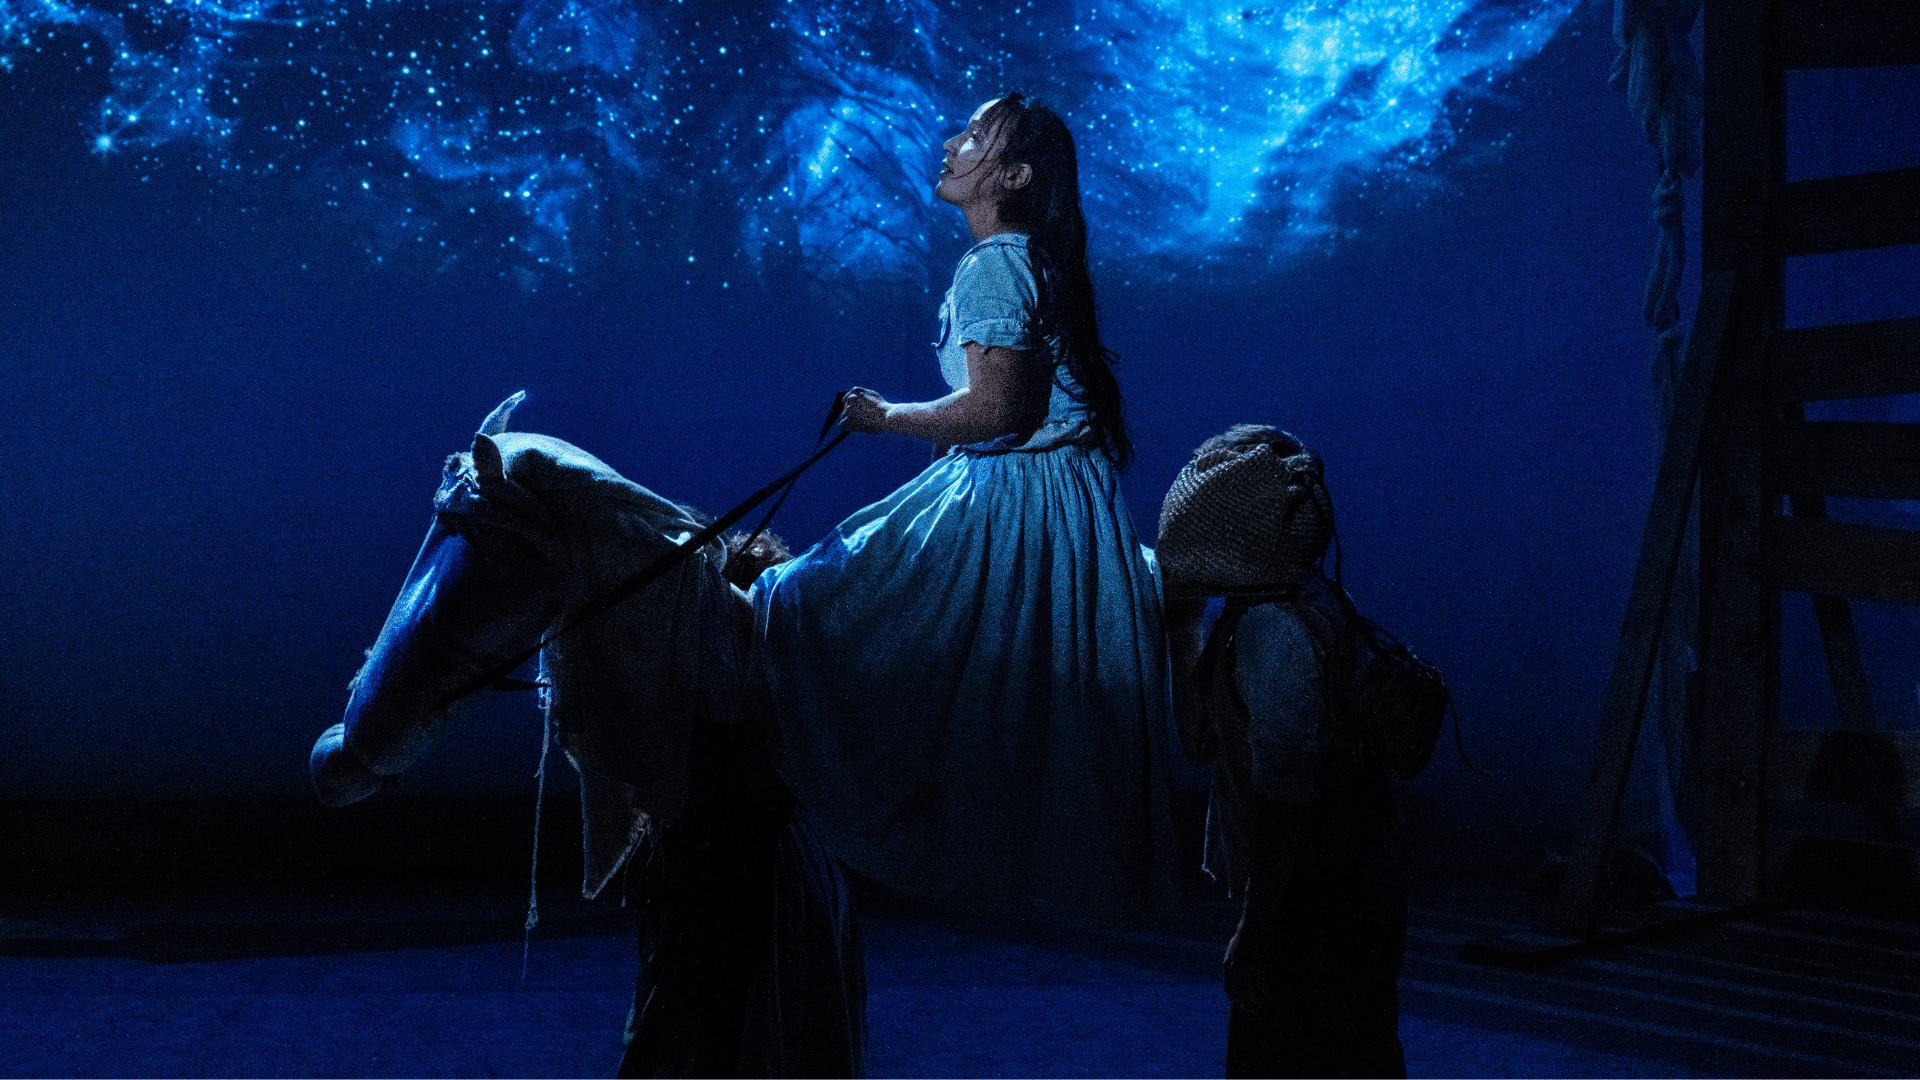 Tess production photo: a performer in a white, full-skirted dress with long, dark hair sits astride a horse made from cloth and looks at a swirling blue galaxy, projected above her.